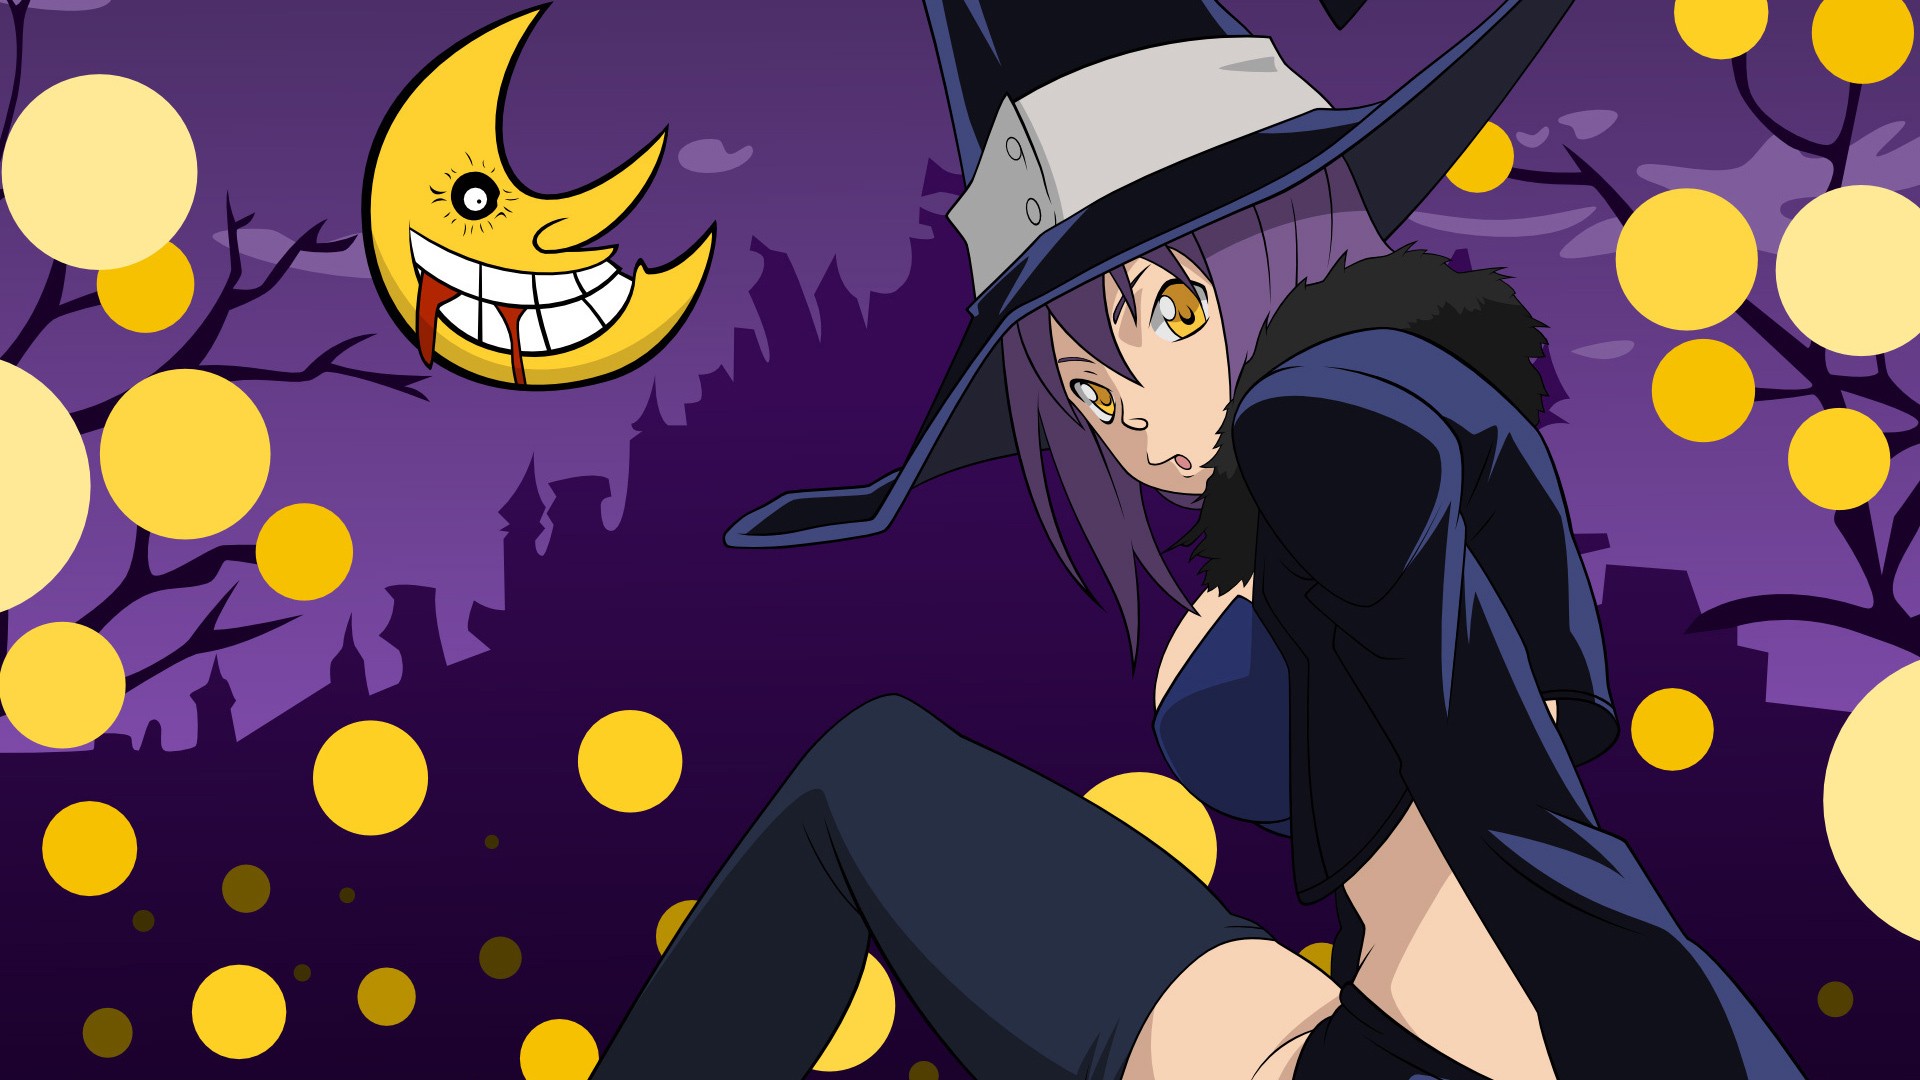 Anime 1920x1080 witch Soul Eater anime anime girls witch hat Moon yellow eyes hat women with hats purple hair